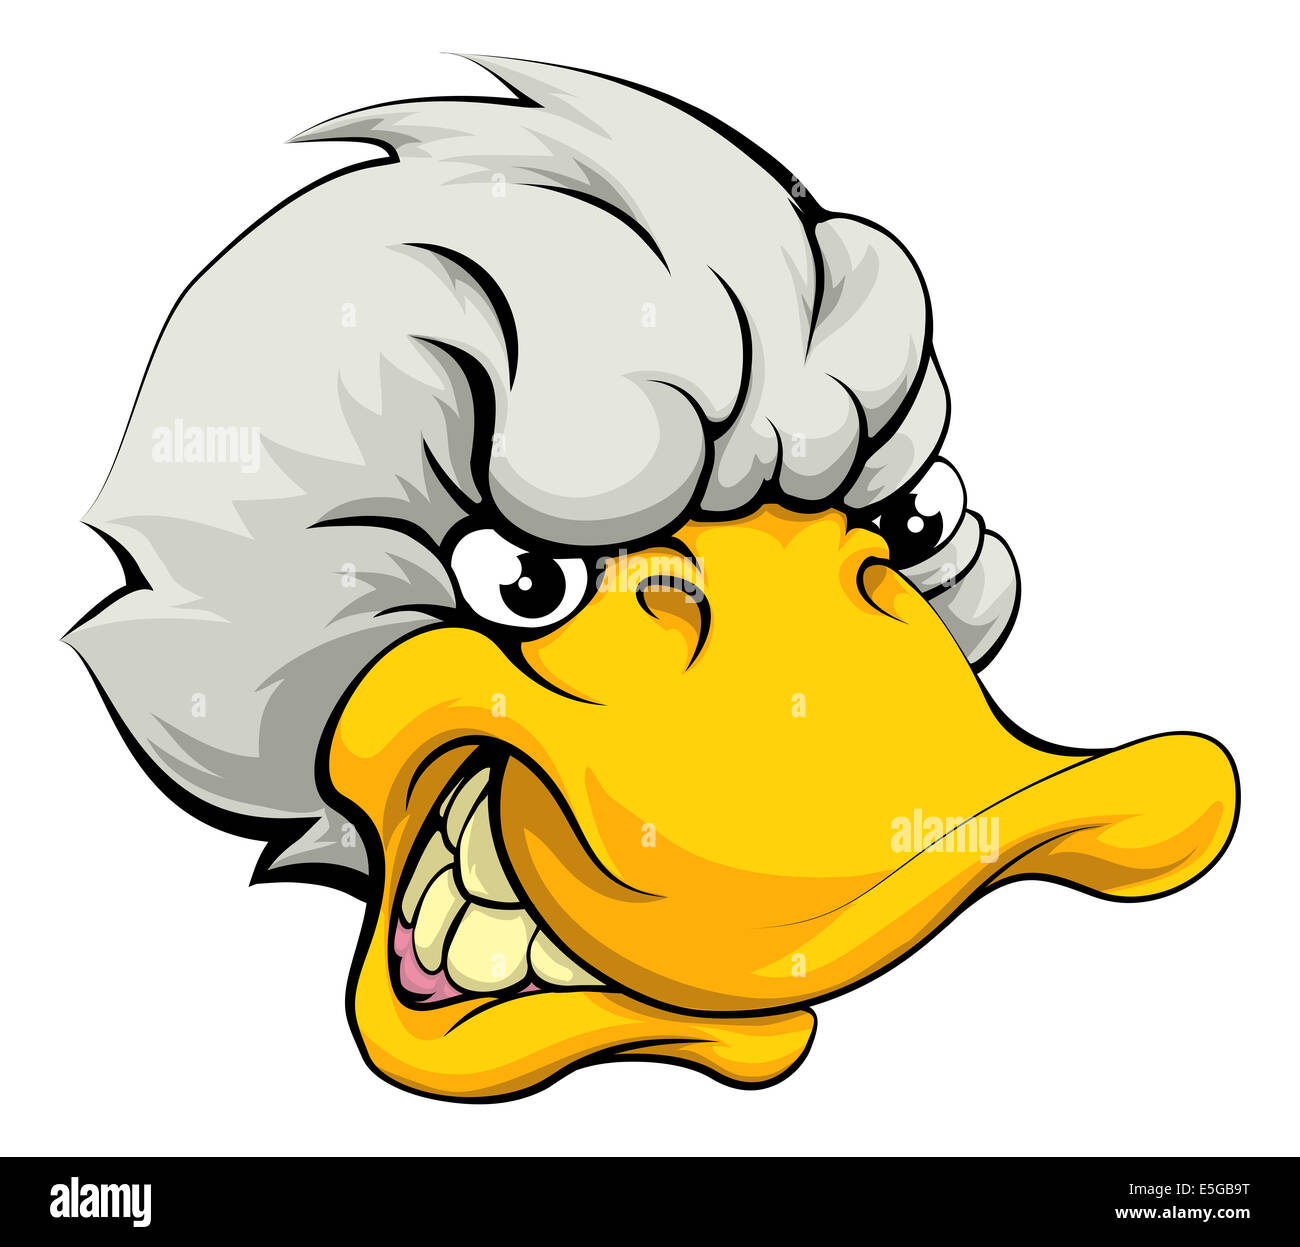 An illustration of a mean looking duck sports mascot Stock Photo